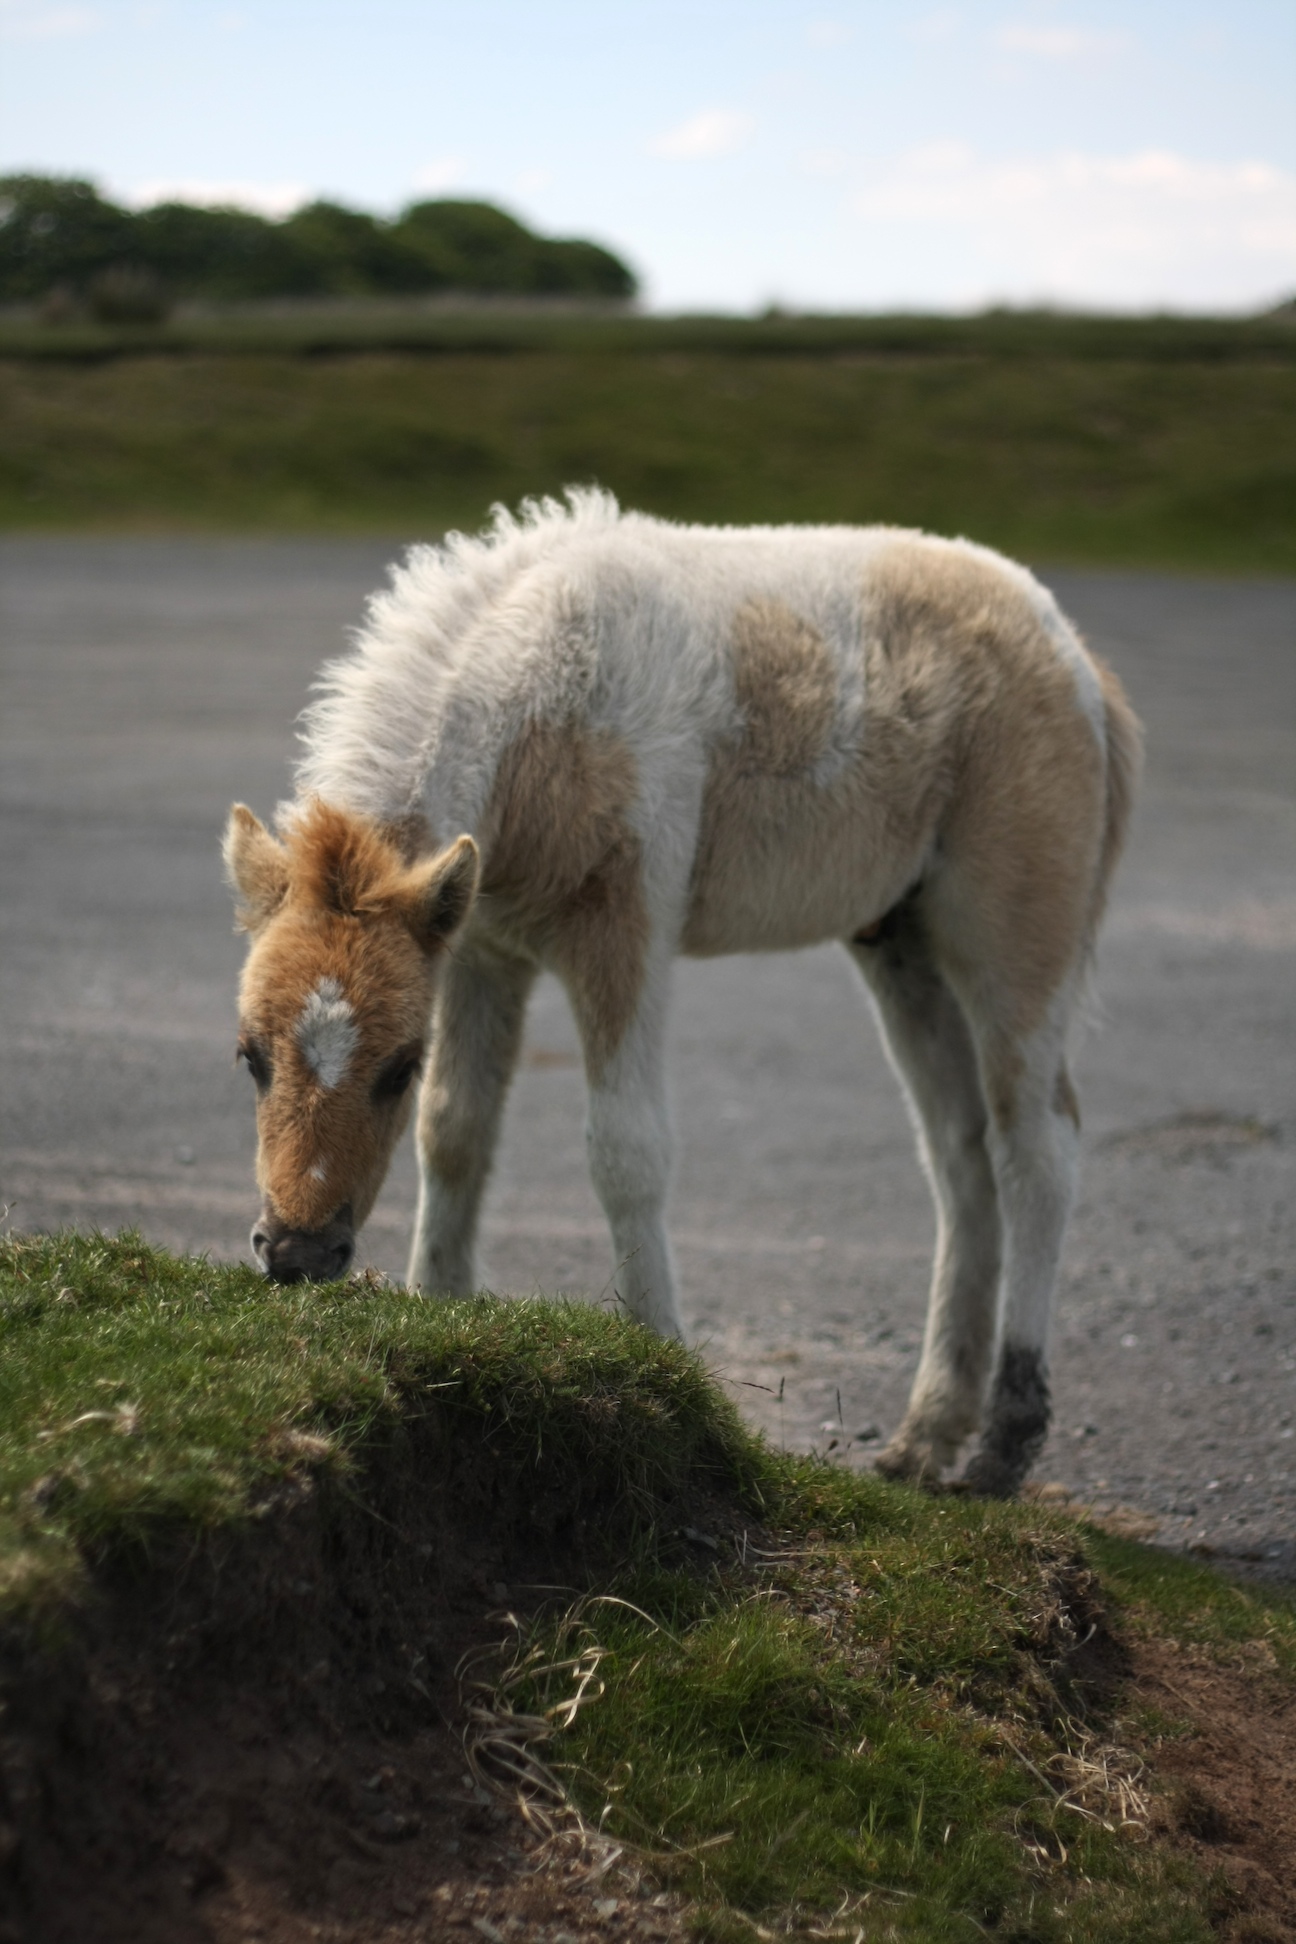 small furry horse standing in a field eating grass